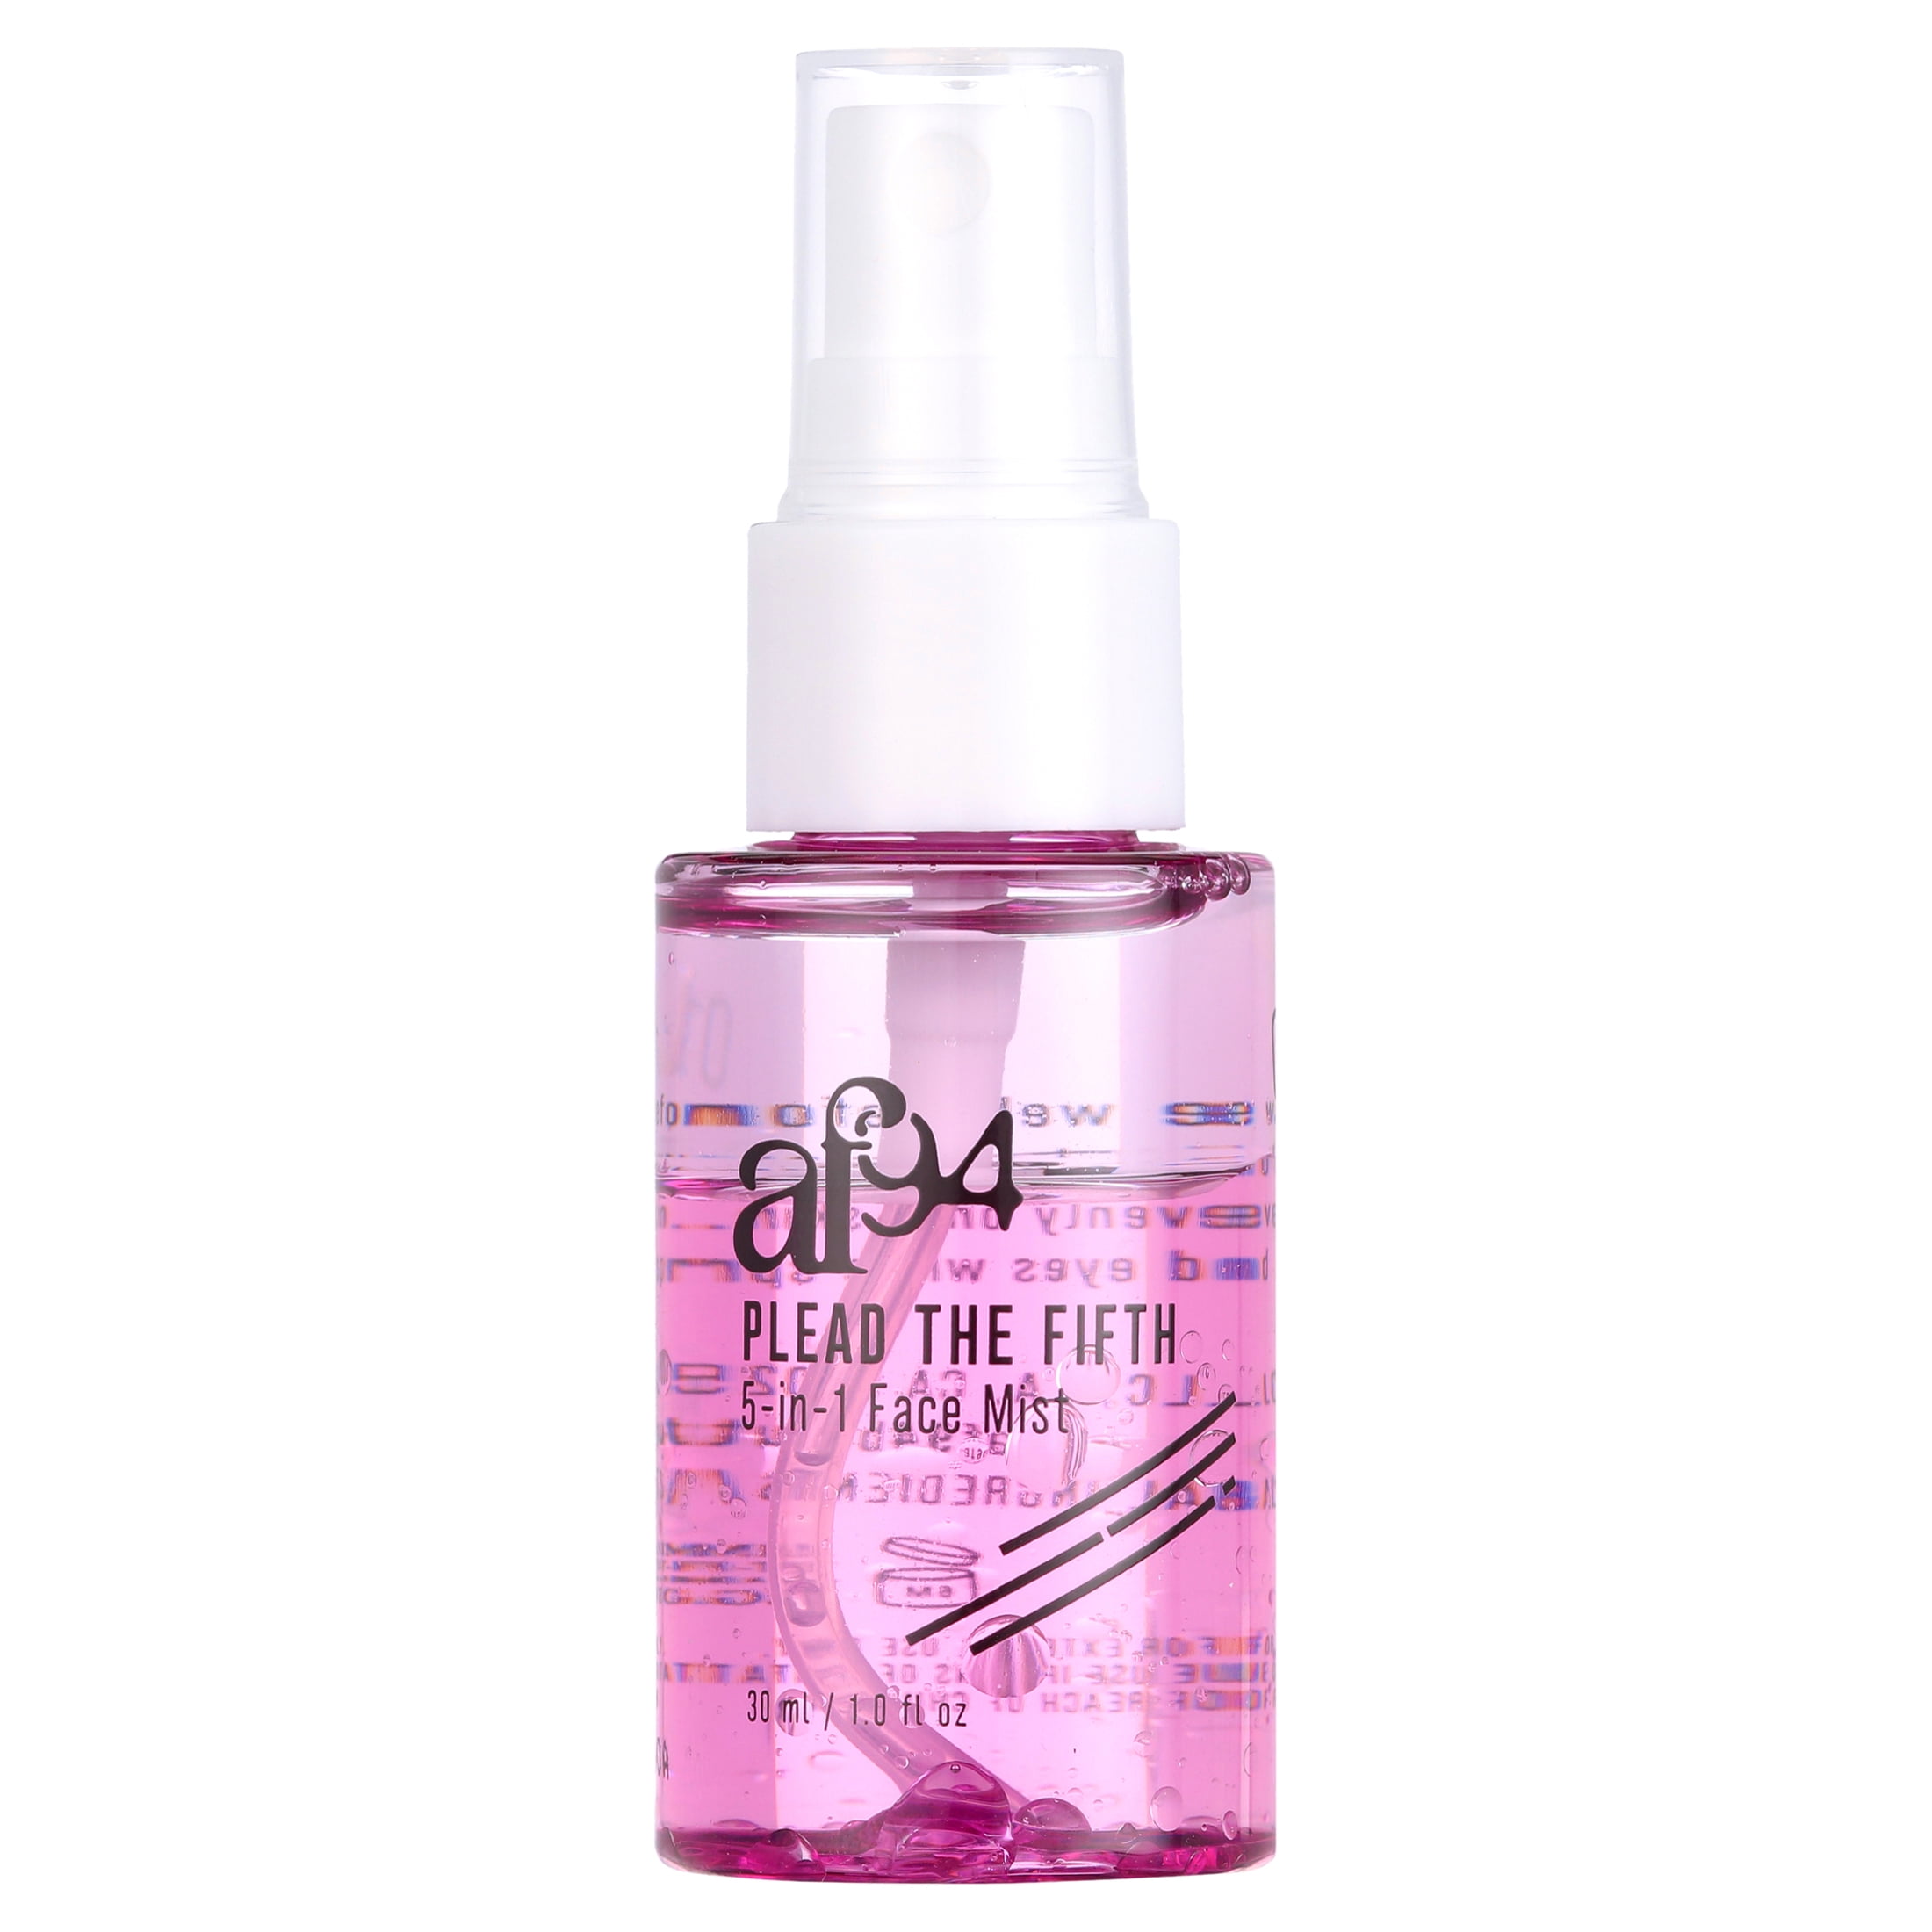 moral Forud type Great Barrier Reef af94 Plead the Fifth 5-in-1 Face Mist, Hydrating & Illuminating, 1.0 fl oz  - Walmart.com